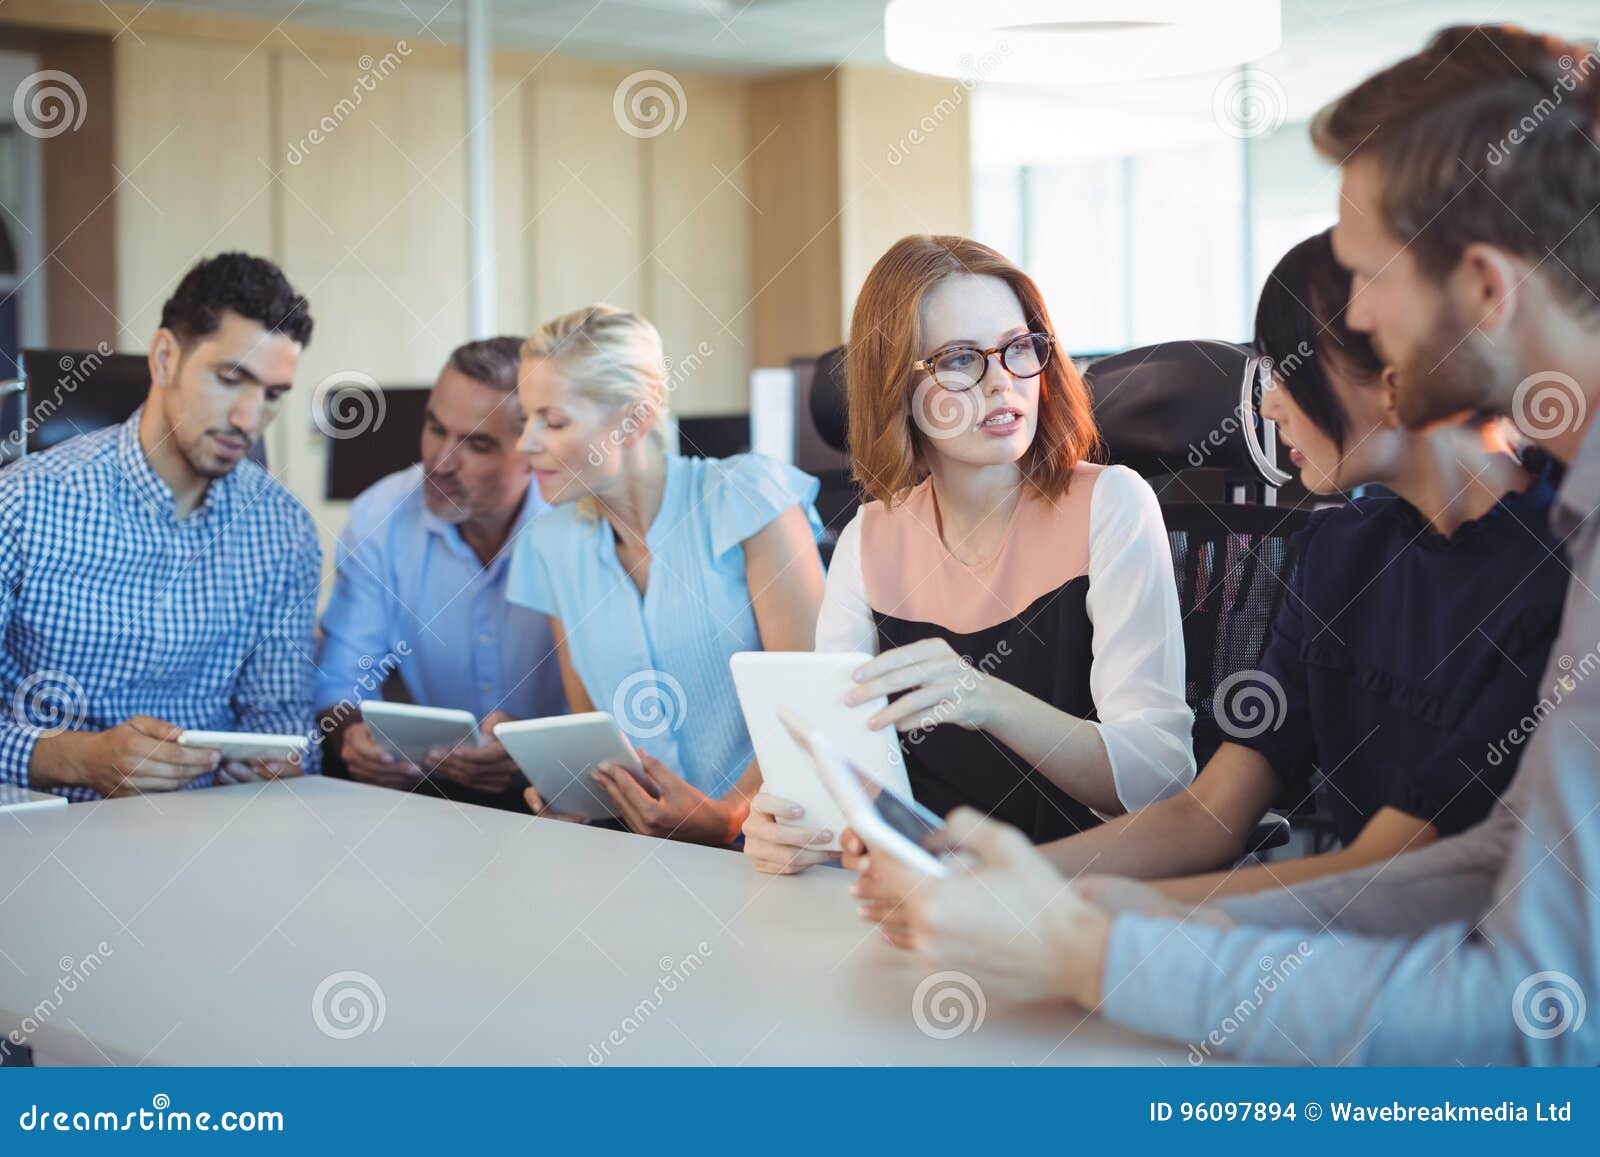 Business People Discussing While Holding Digital Tablets Stock Photo